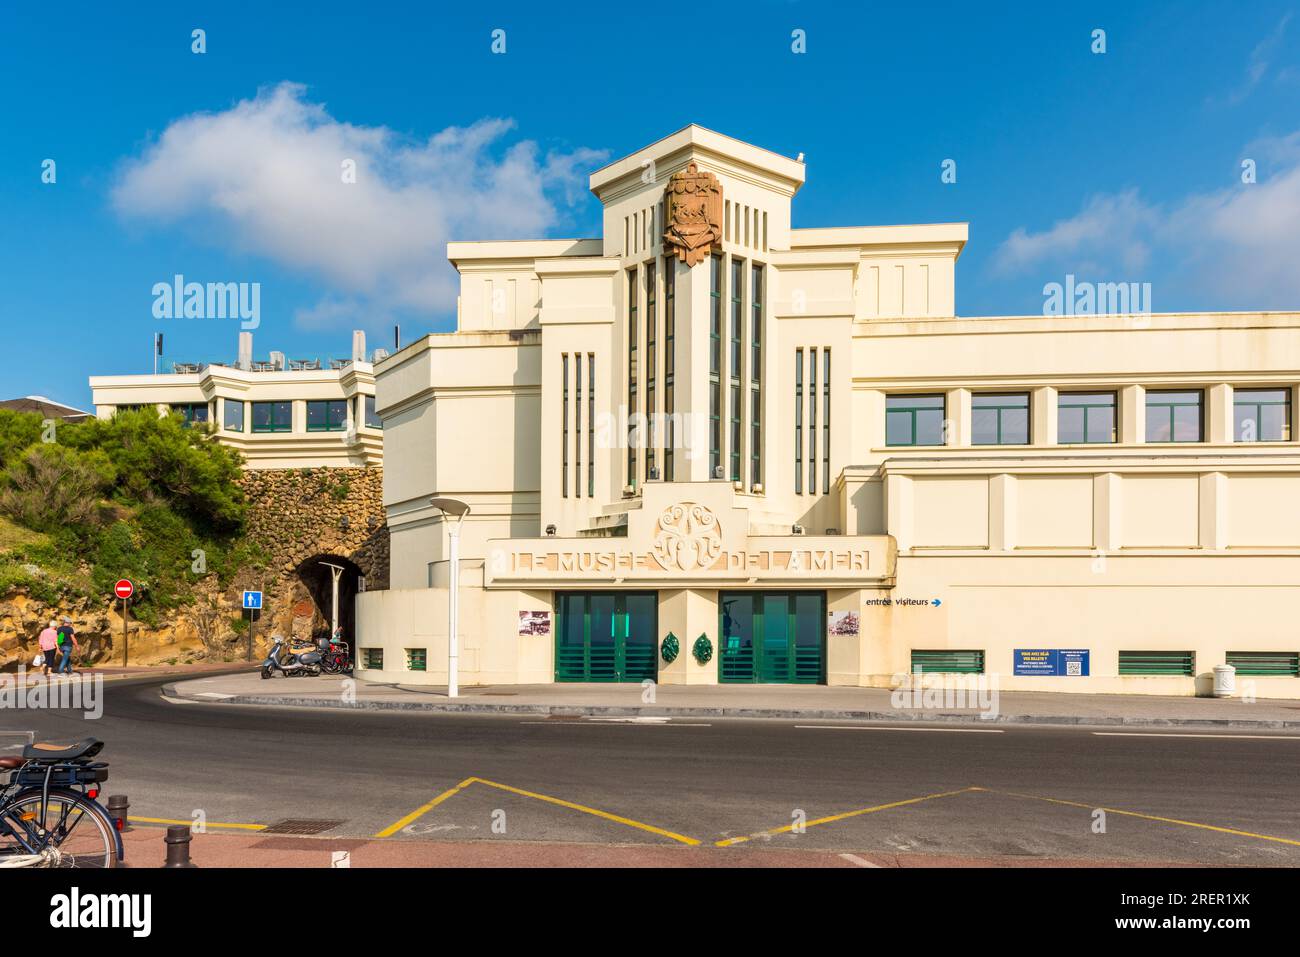 Biarritz Aquarium, also known as Museum of the Sea, is an aquarium in Biarritz, France. The building, in art deco style, opened in 1933. Stock Photo